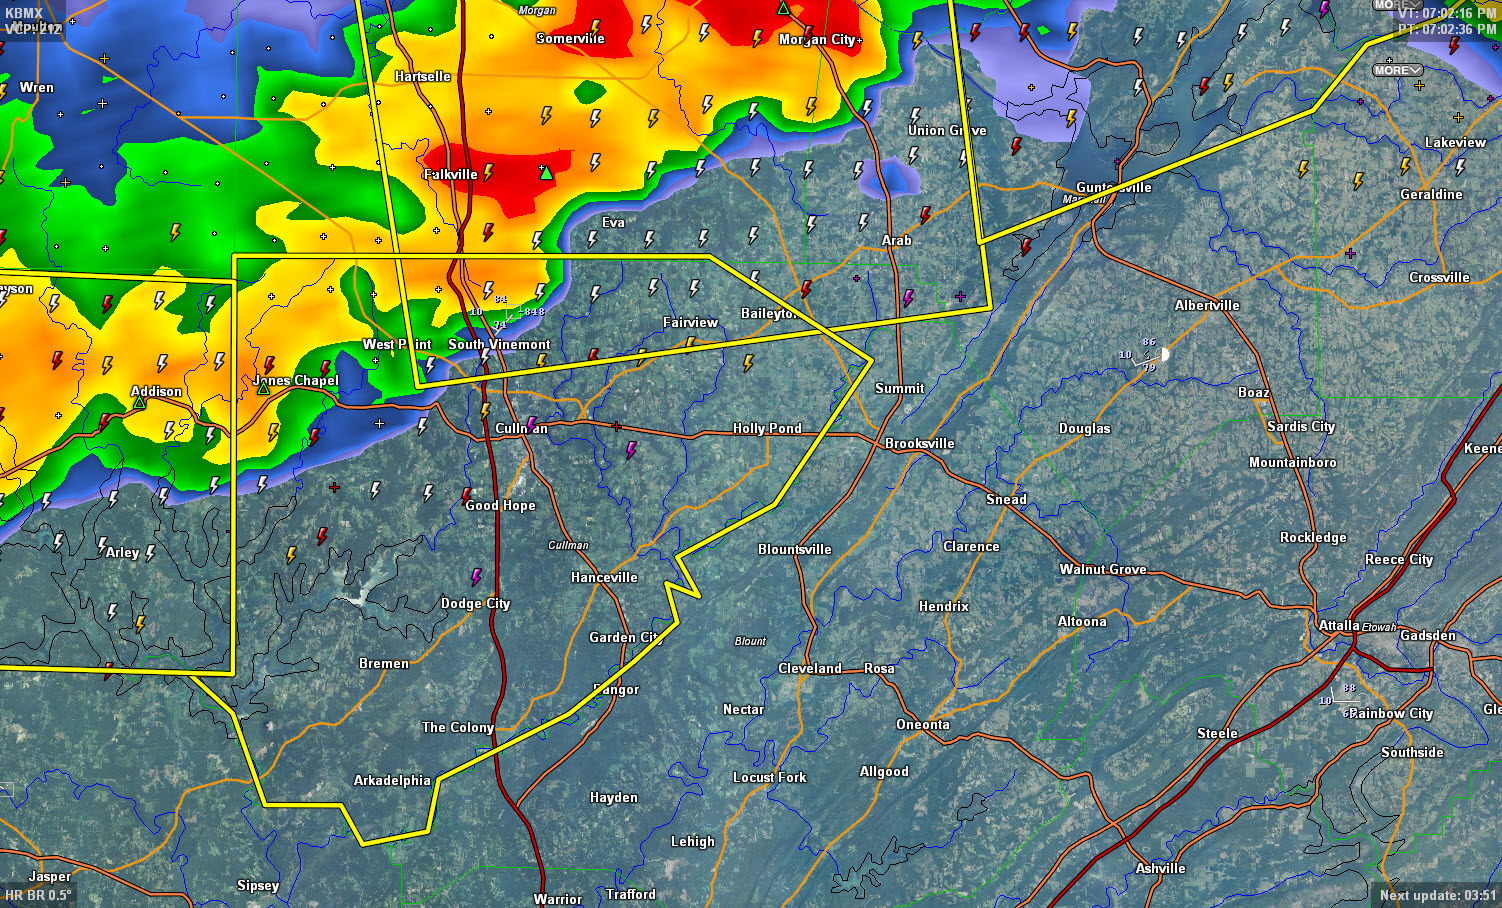 Severe Thunderstorm Warning for Cullman County